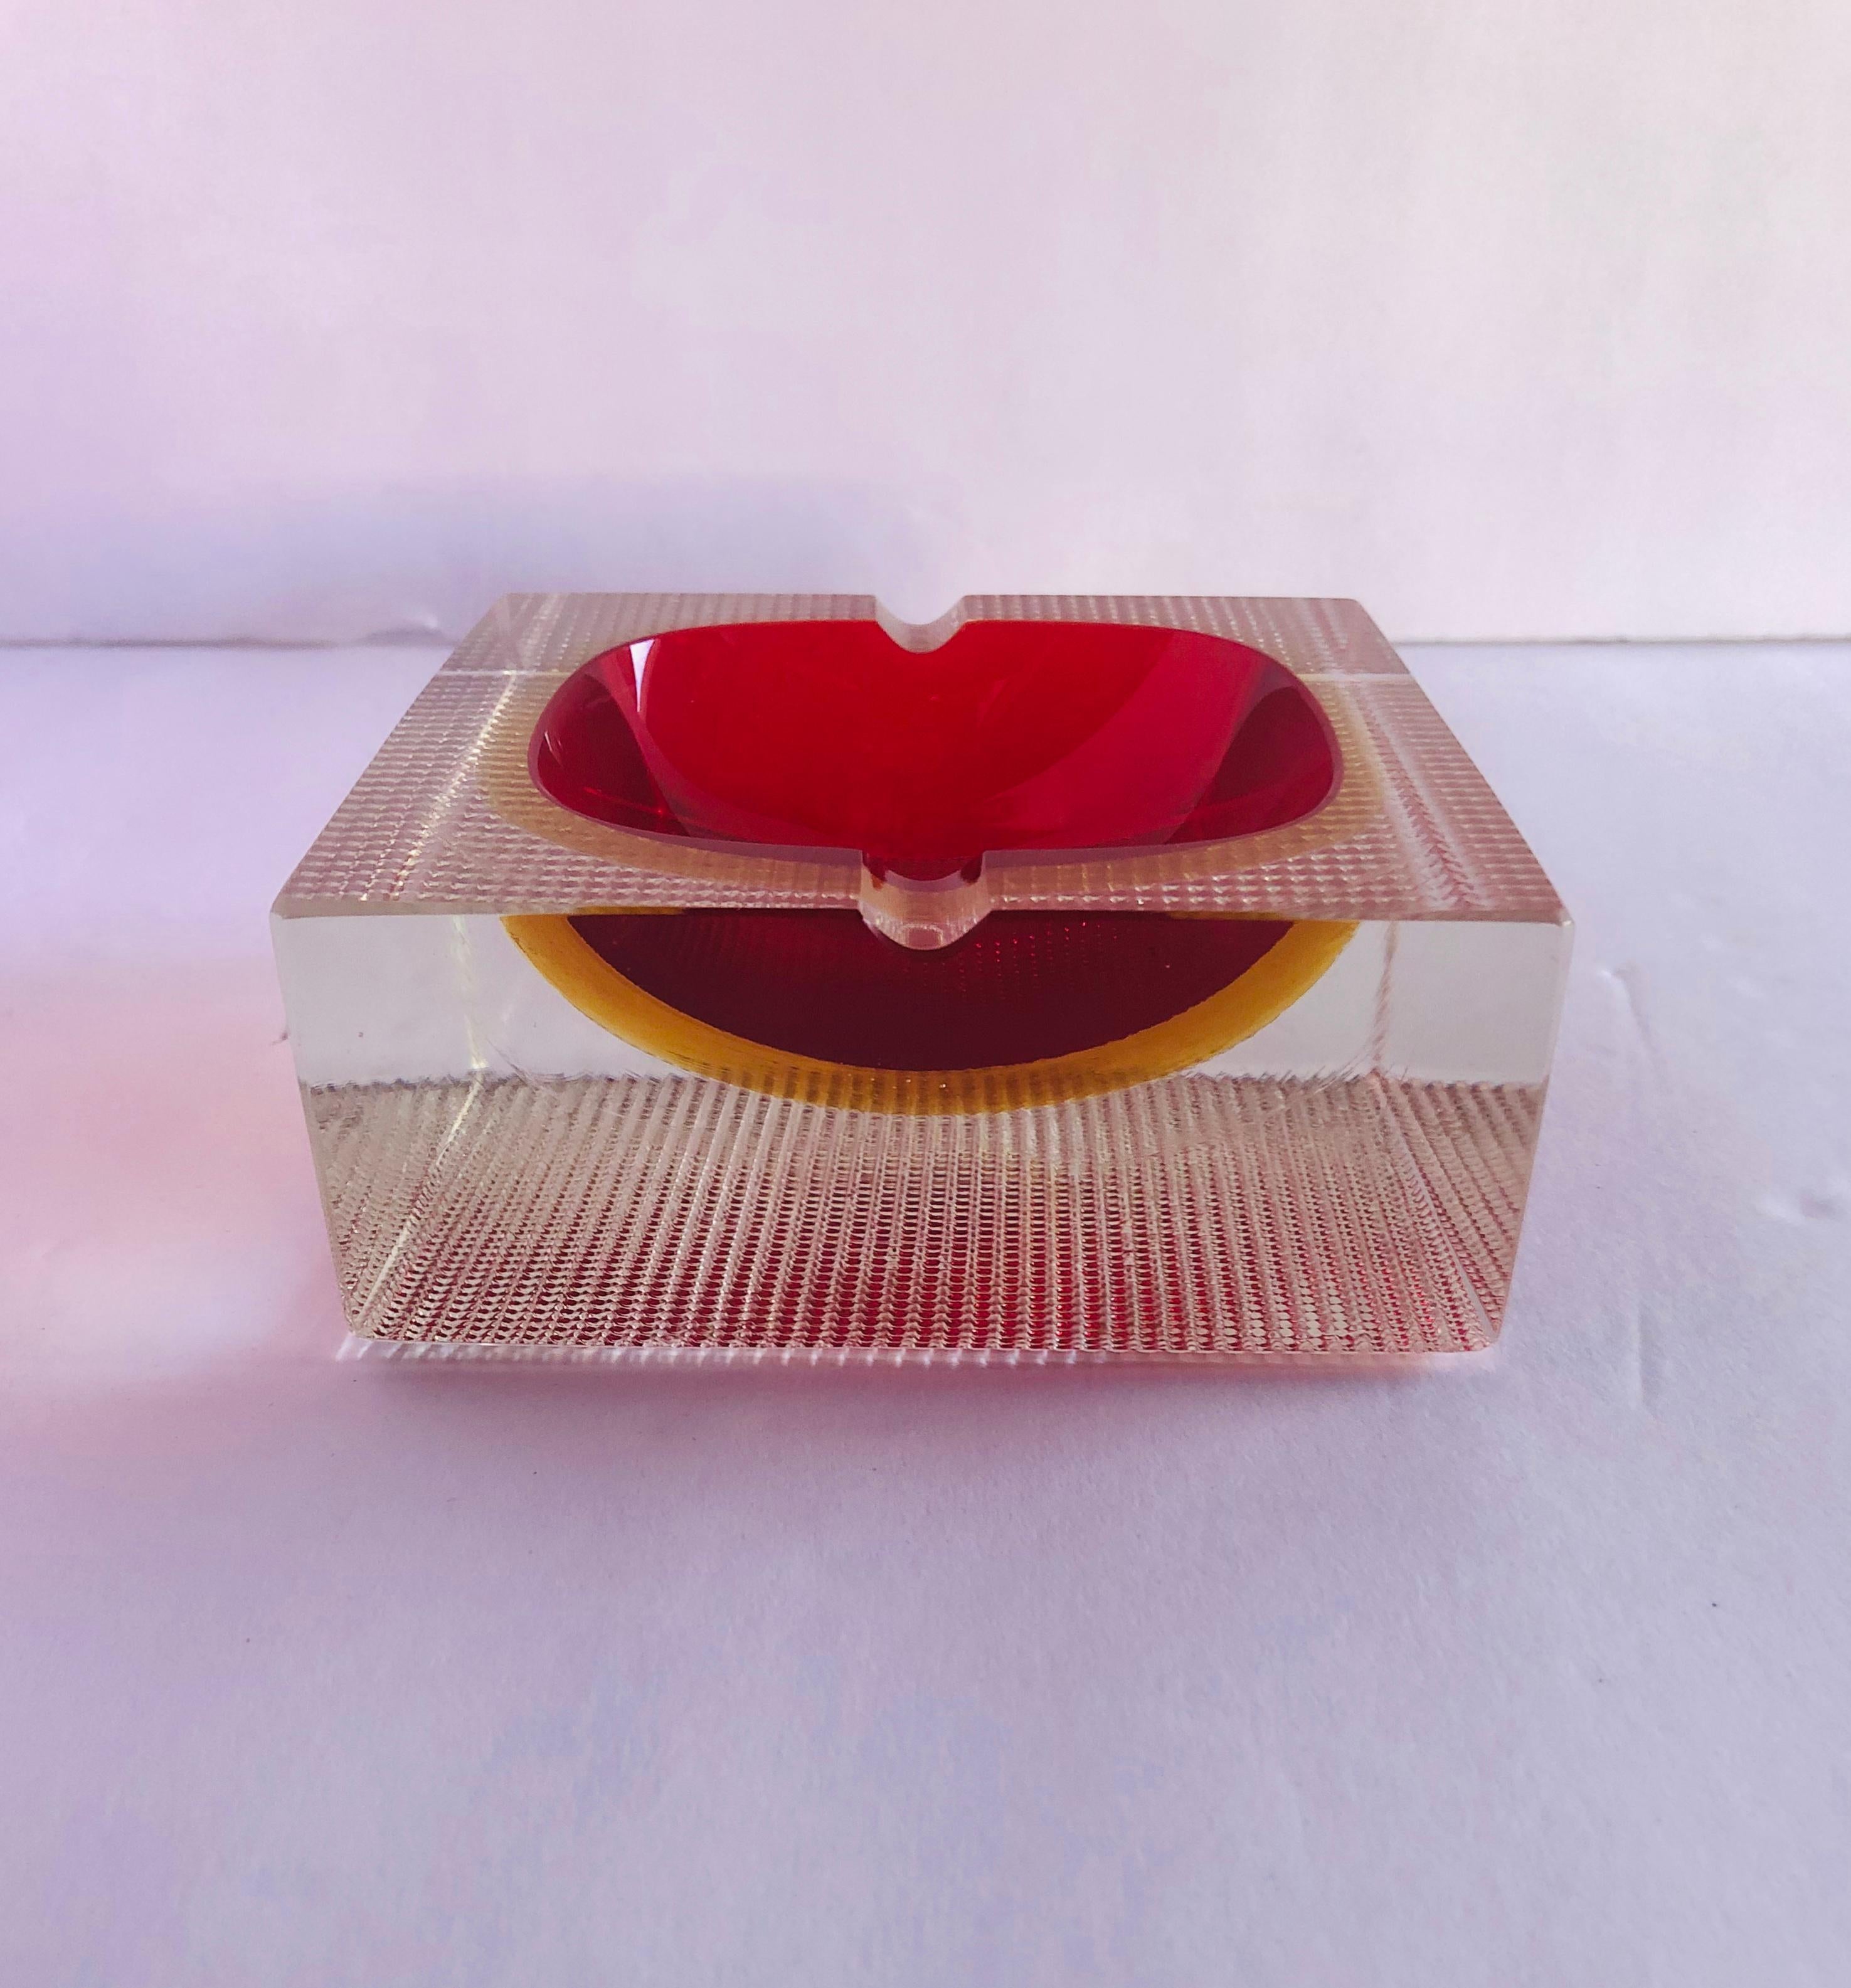 Vintage Italian red and amber Murano glass ashtray / Made in Italy circa 1960s
Measures: Length 4.75 inches / width 4.75 inches / height 2 inches
1 in stock in Palm Springs on FINAL CLEARANCE SALE for $399!!
This piece makes for a great and unique